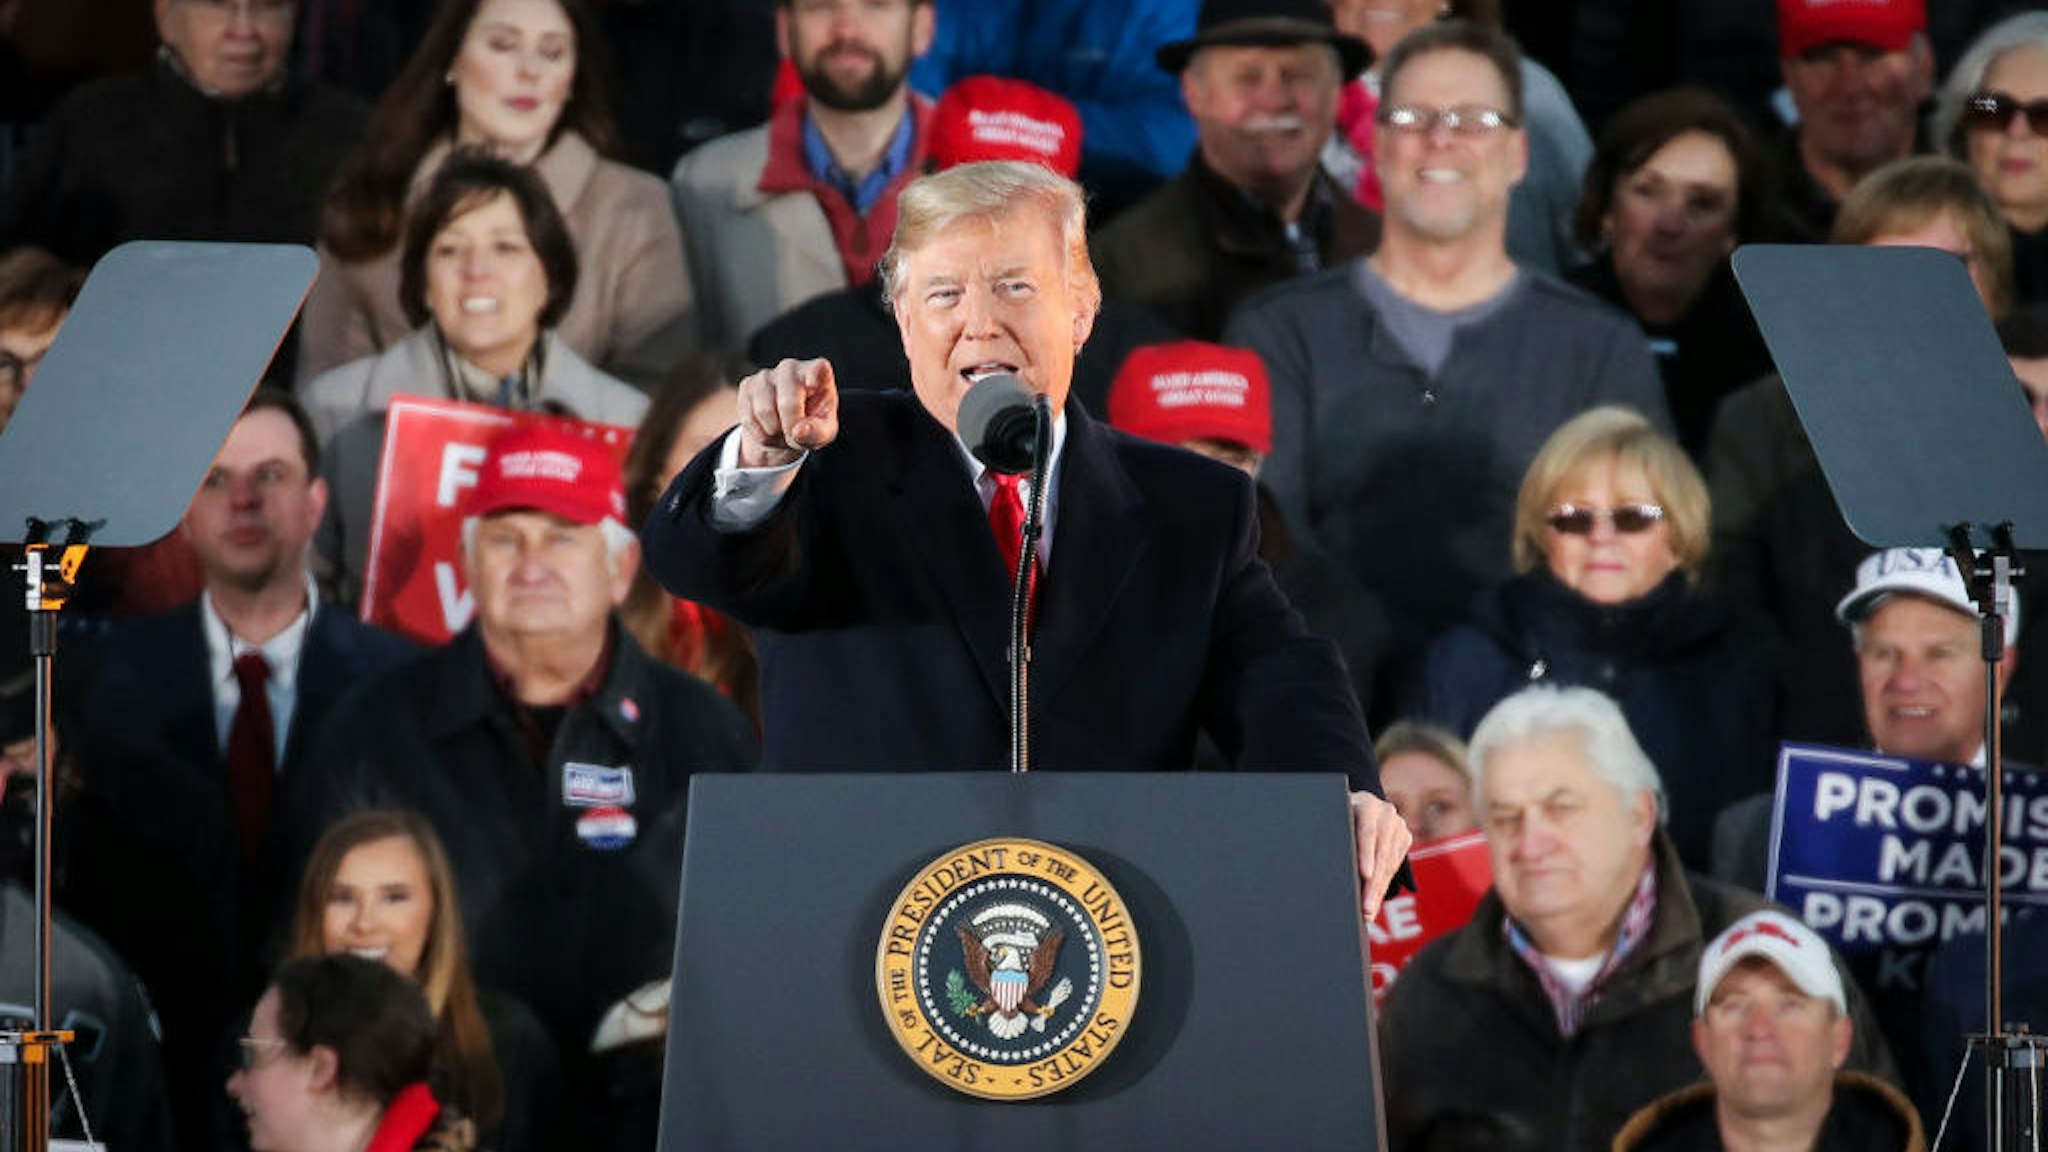 President Donald Trump speaks during a rally at the Tupelo Regional Airport, November 26, 2018 in Tupelo, Mississippi. President Trump is holding two rallies on Monday in Mississippi, in support of Republican candidate for U.S. Senate Cindy Hyde-Smith, who faces off against Democratic candidate Mike Espy in a runoff election on Tuesday. (Photo by Drew Angerer/Getty Images)